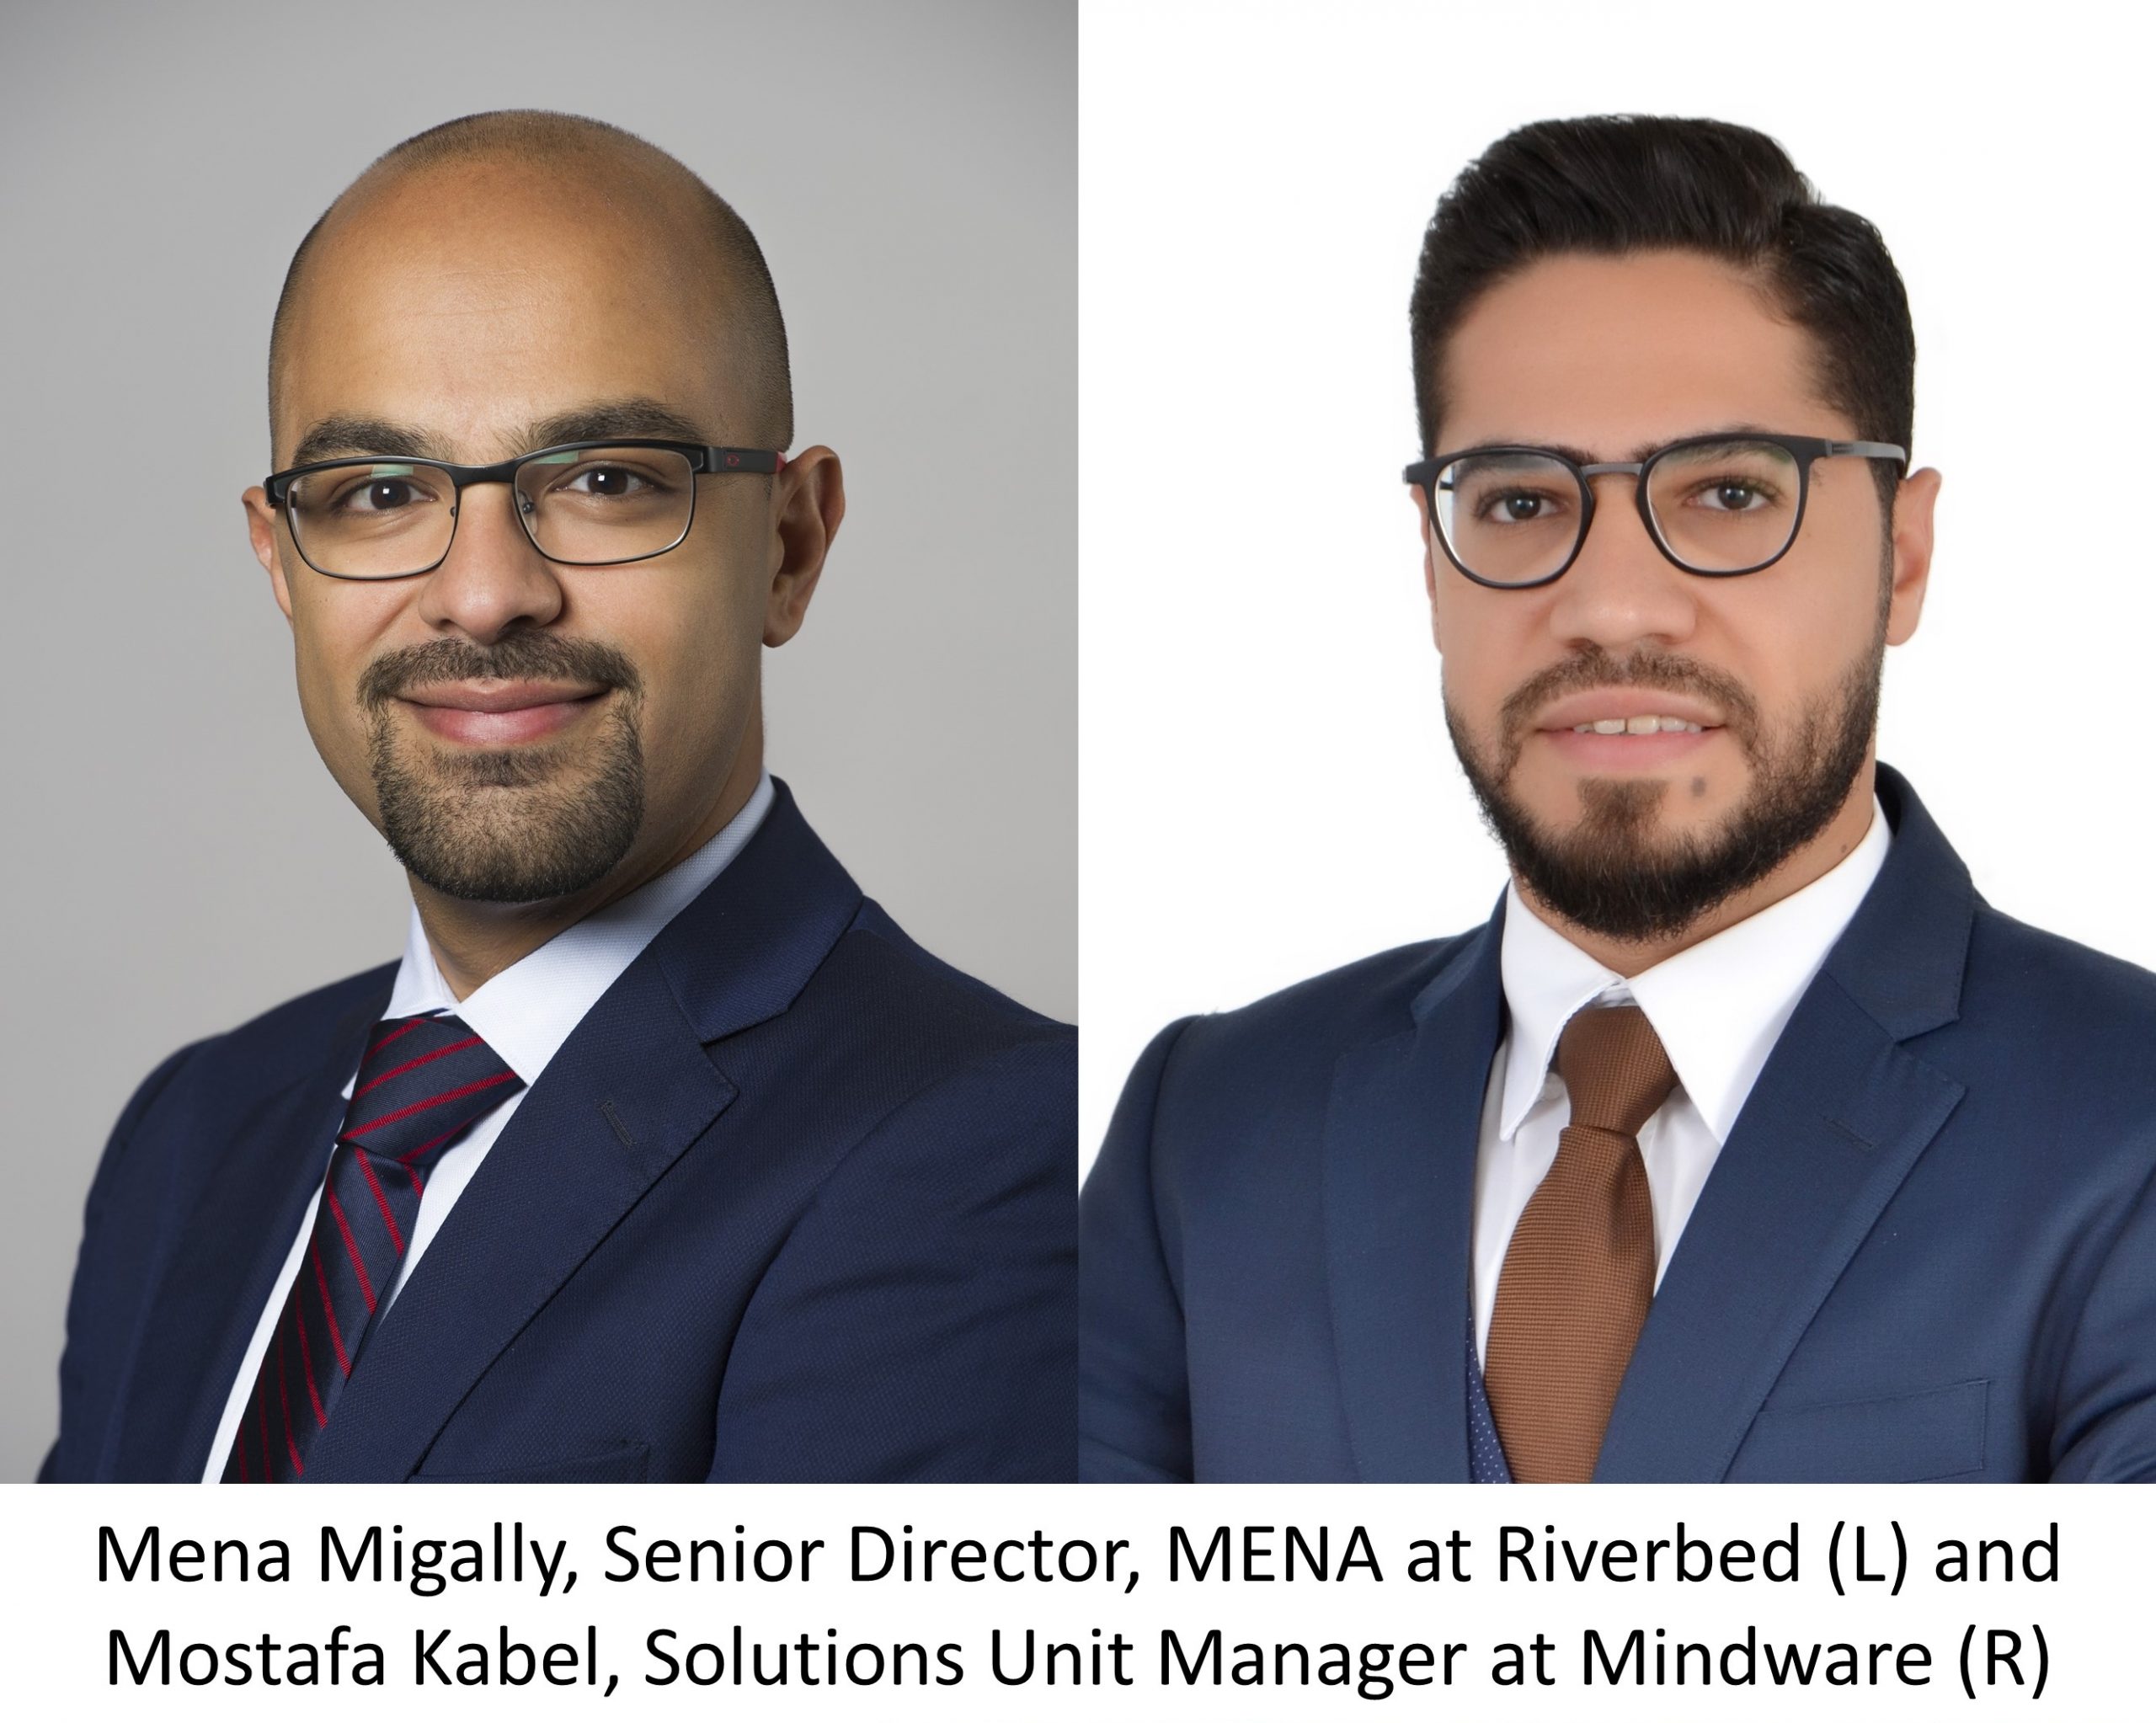 Image for Mindware Blends Technology From Microsoft And Riverbed To Deliver Powerful WAN-Op And Application Acceleration Solutions To Regional Enterprises In The Middle East